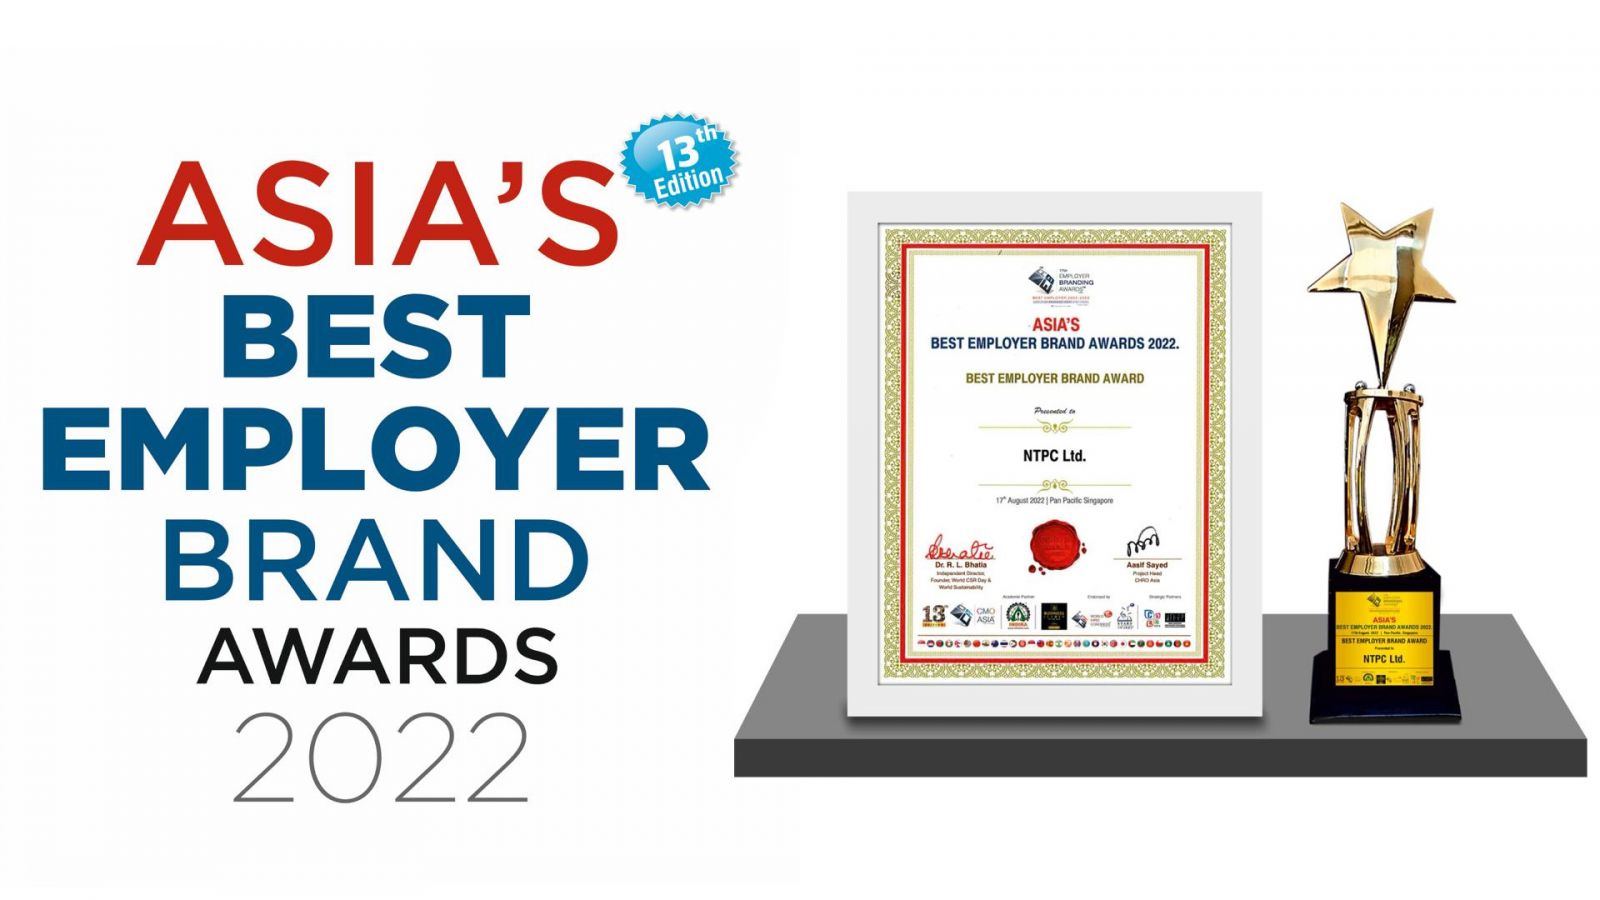 NTPC honoured with 'Asia’s Best Employer Brand Award 2022